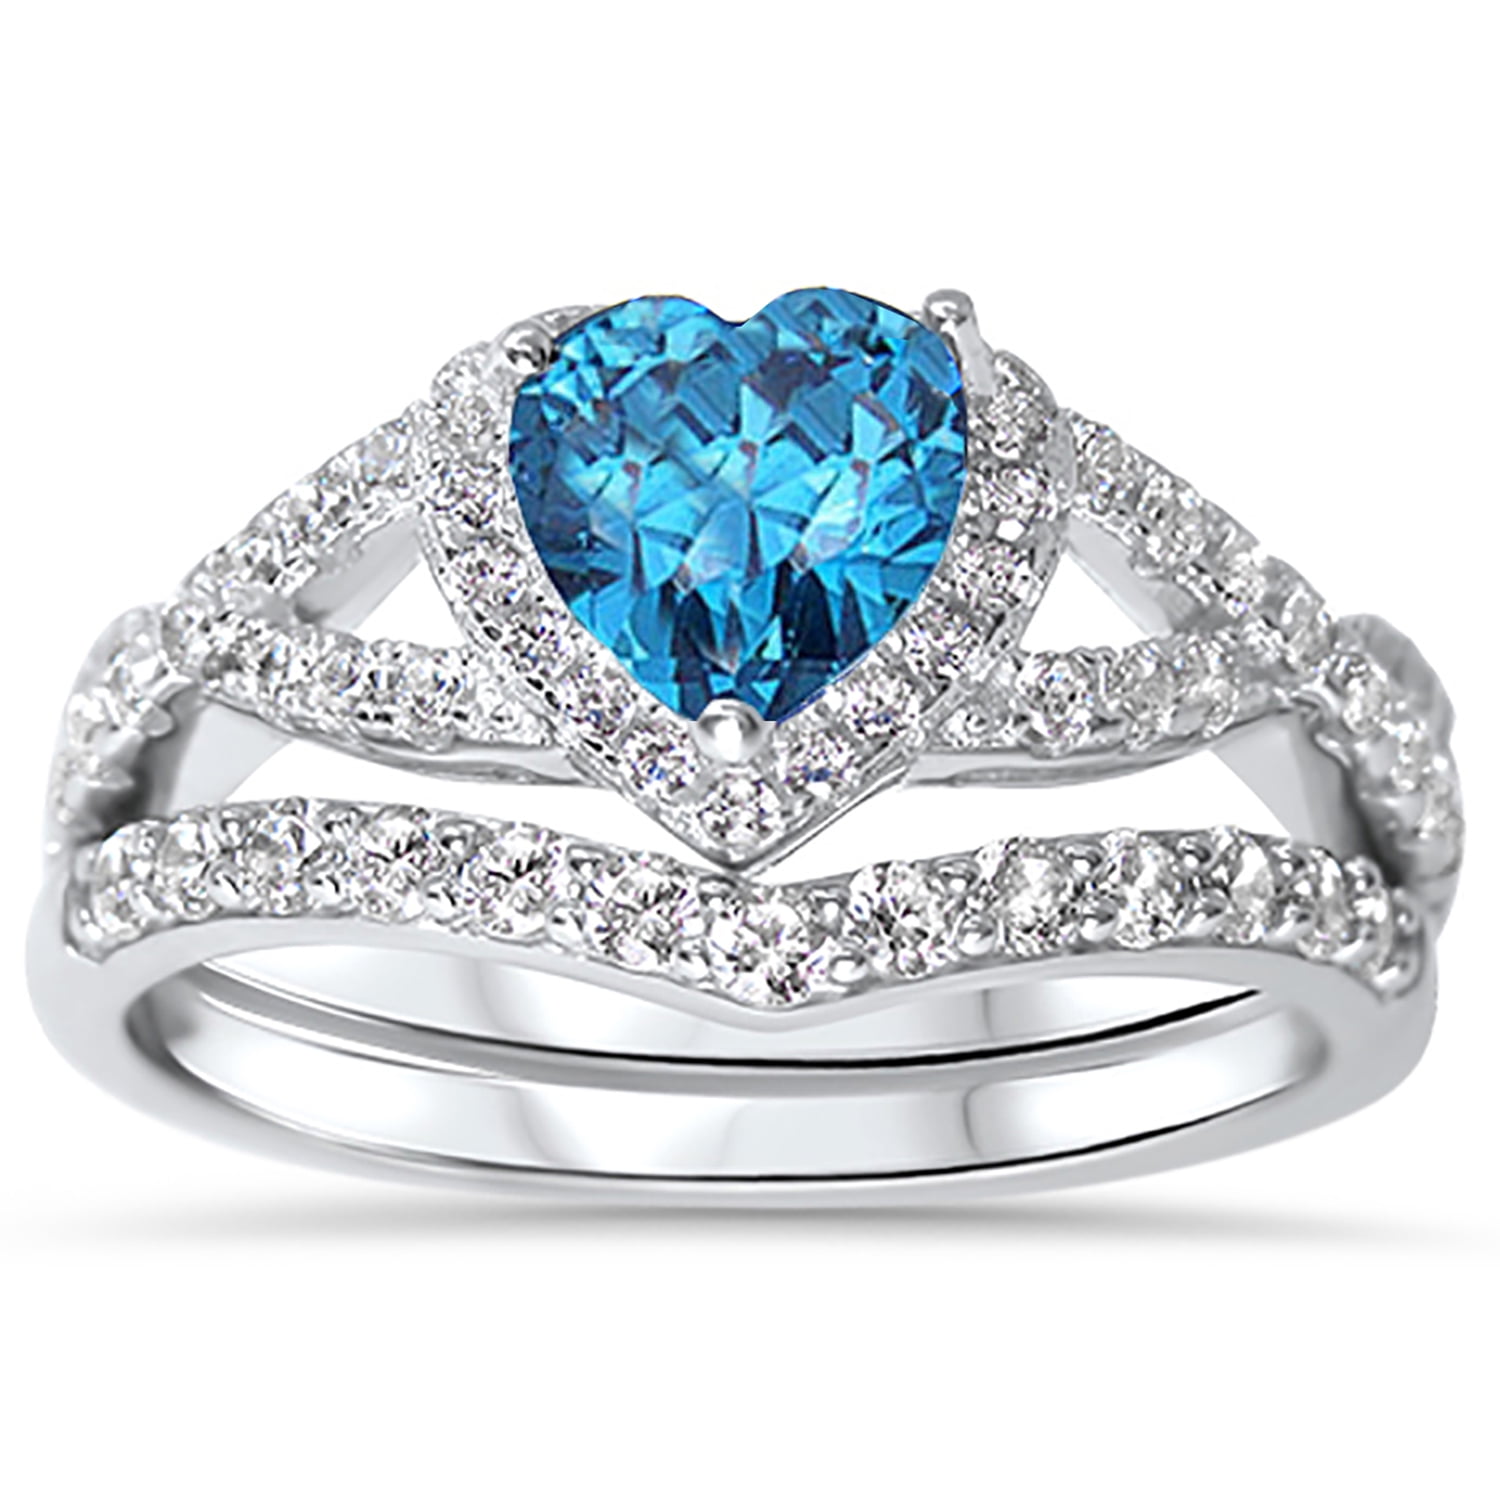 Blue Topaz Romantic Engagement Women Ring 925 Sterling Silver Platinum Plated 